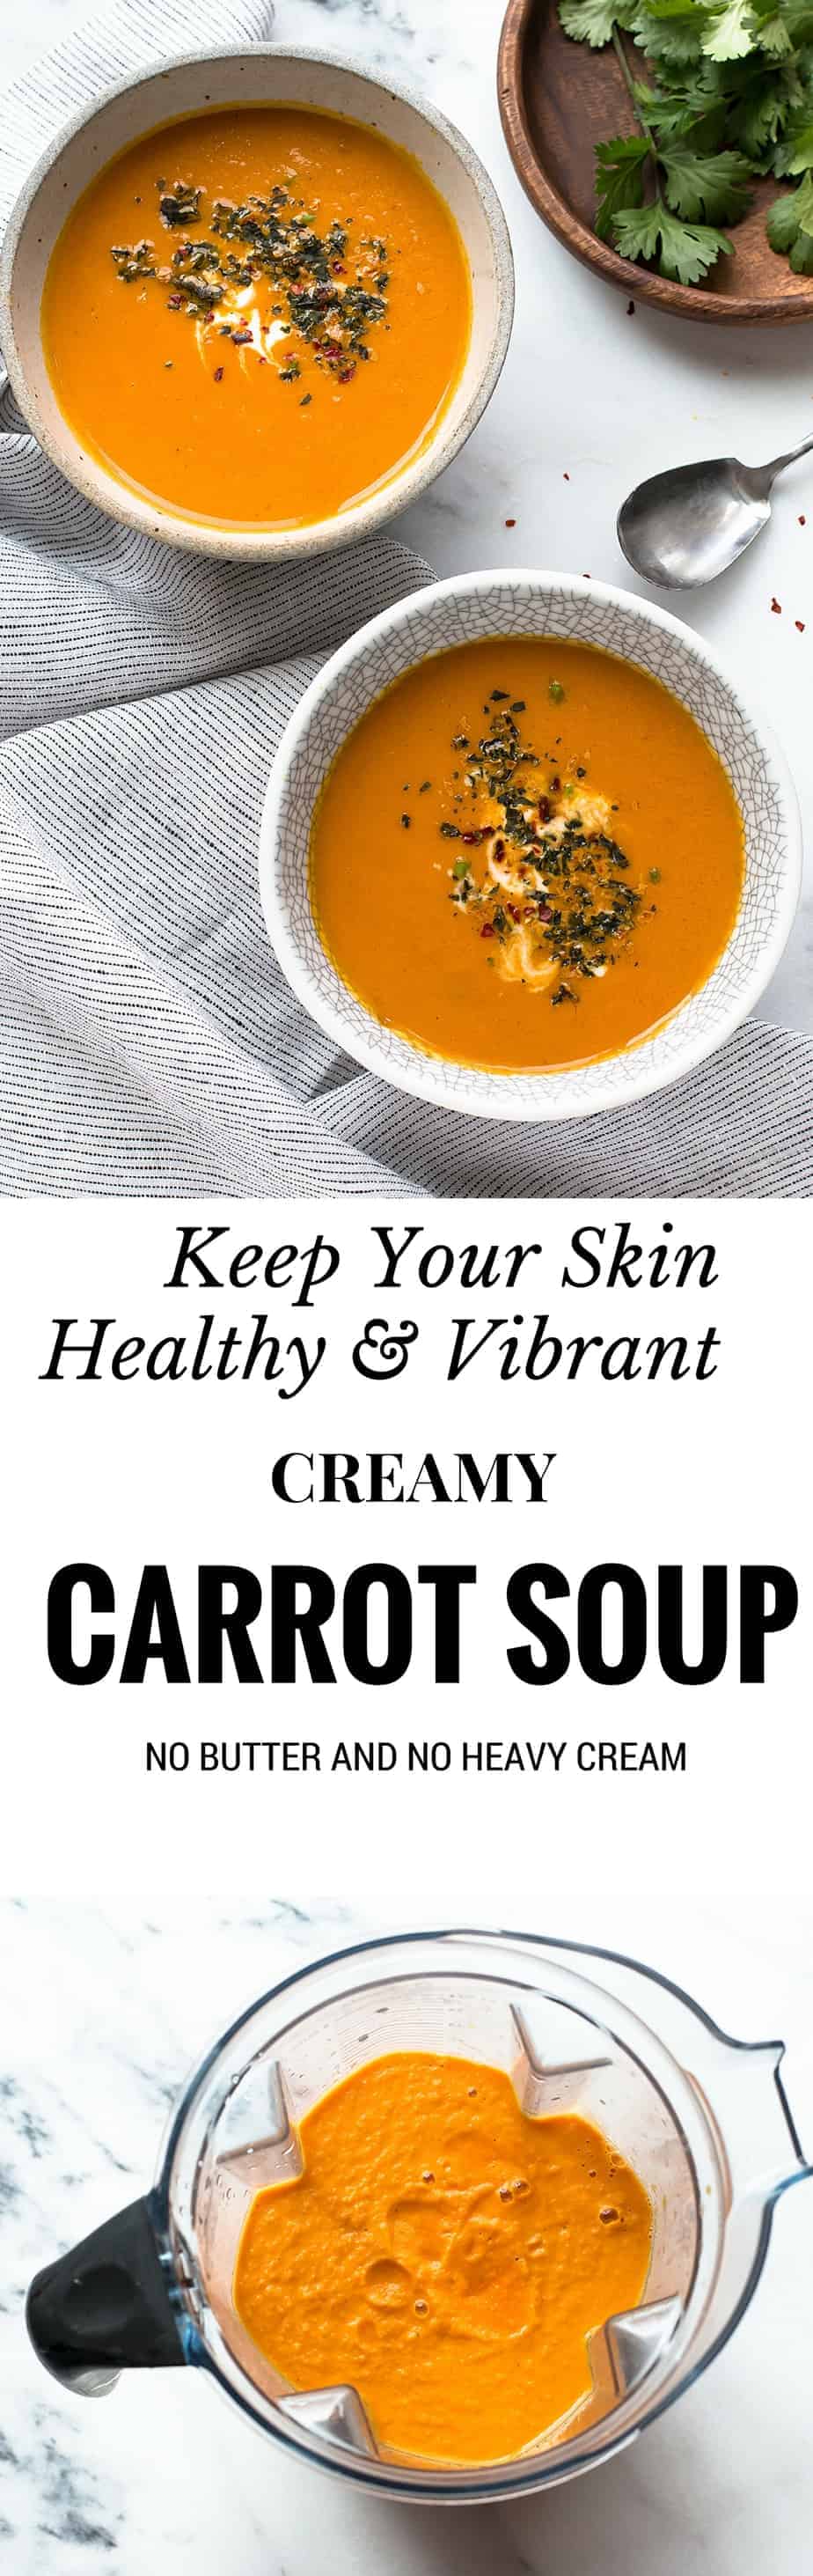 keep-your-skin-healthy-vibrant-with-curried-carrot-soup